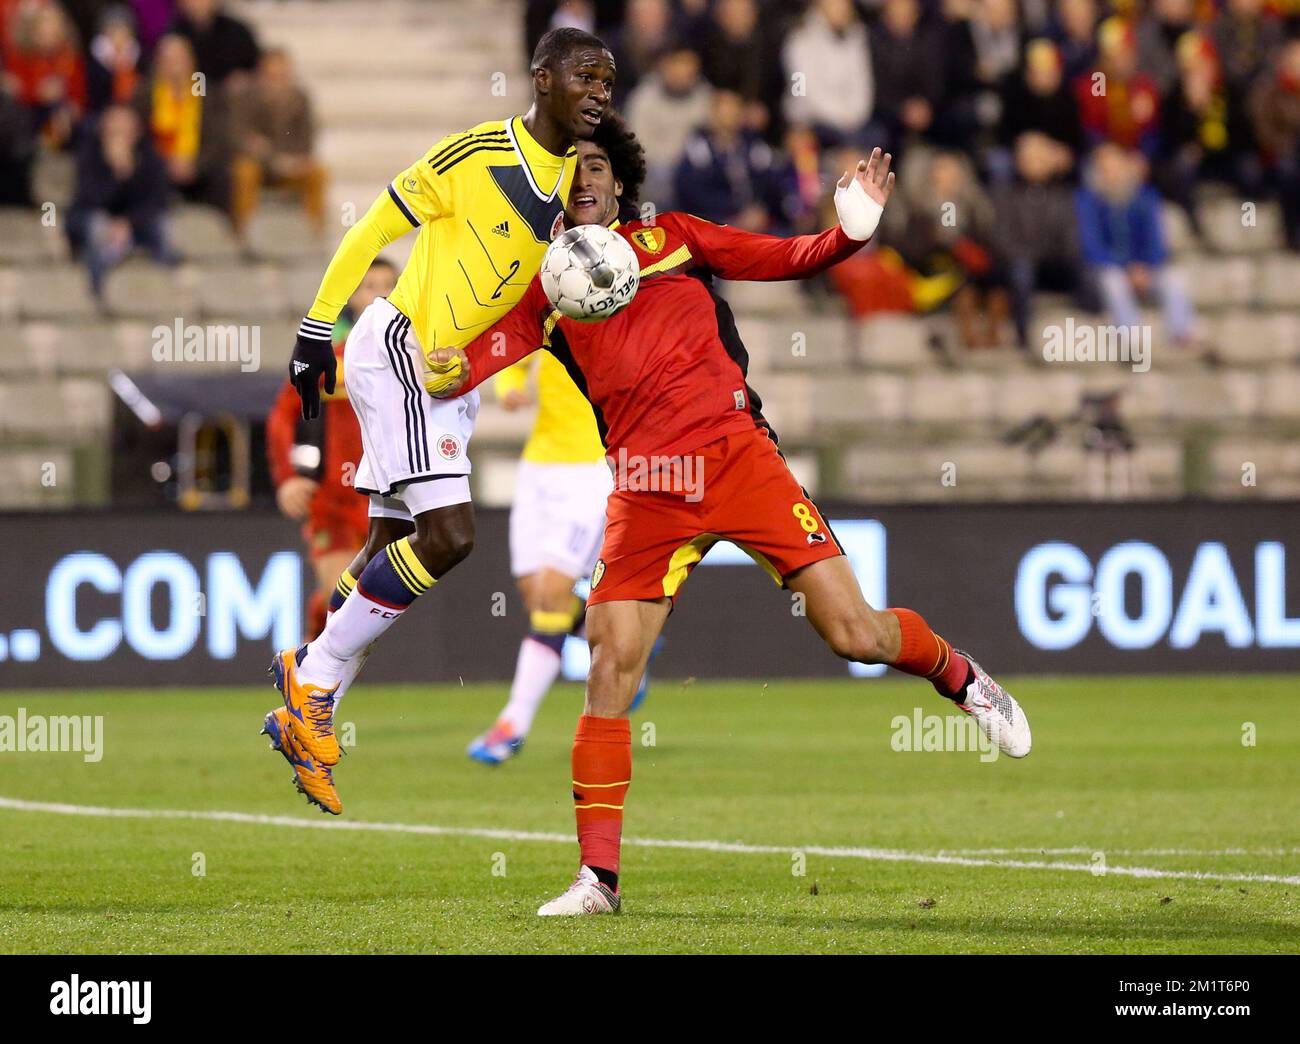 Colombia's Cristian Zapata and Belgium's Marouane Fellaini fight for the ball during a friendly soccer game between the Belgian national soccer team Red Devils and Colombia, at the Koning Boudewijn Stadion - Stade Roi Baudouin in Brussels, on Thursday 14 November 2013. BELGA PHOTO VIRGINIE LEFOUR Stock Photo